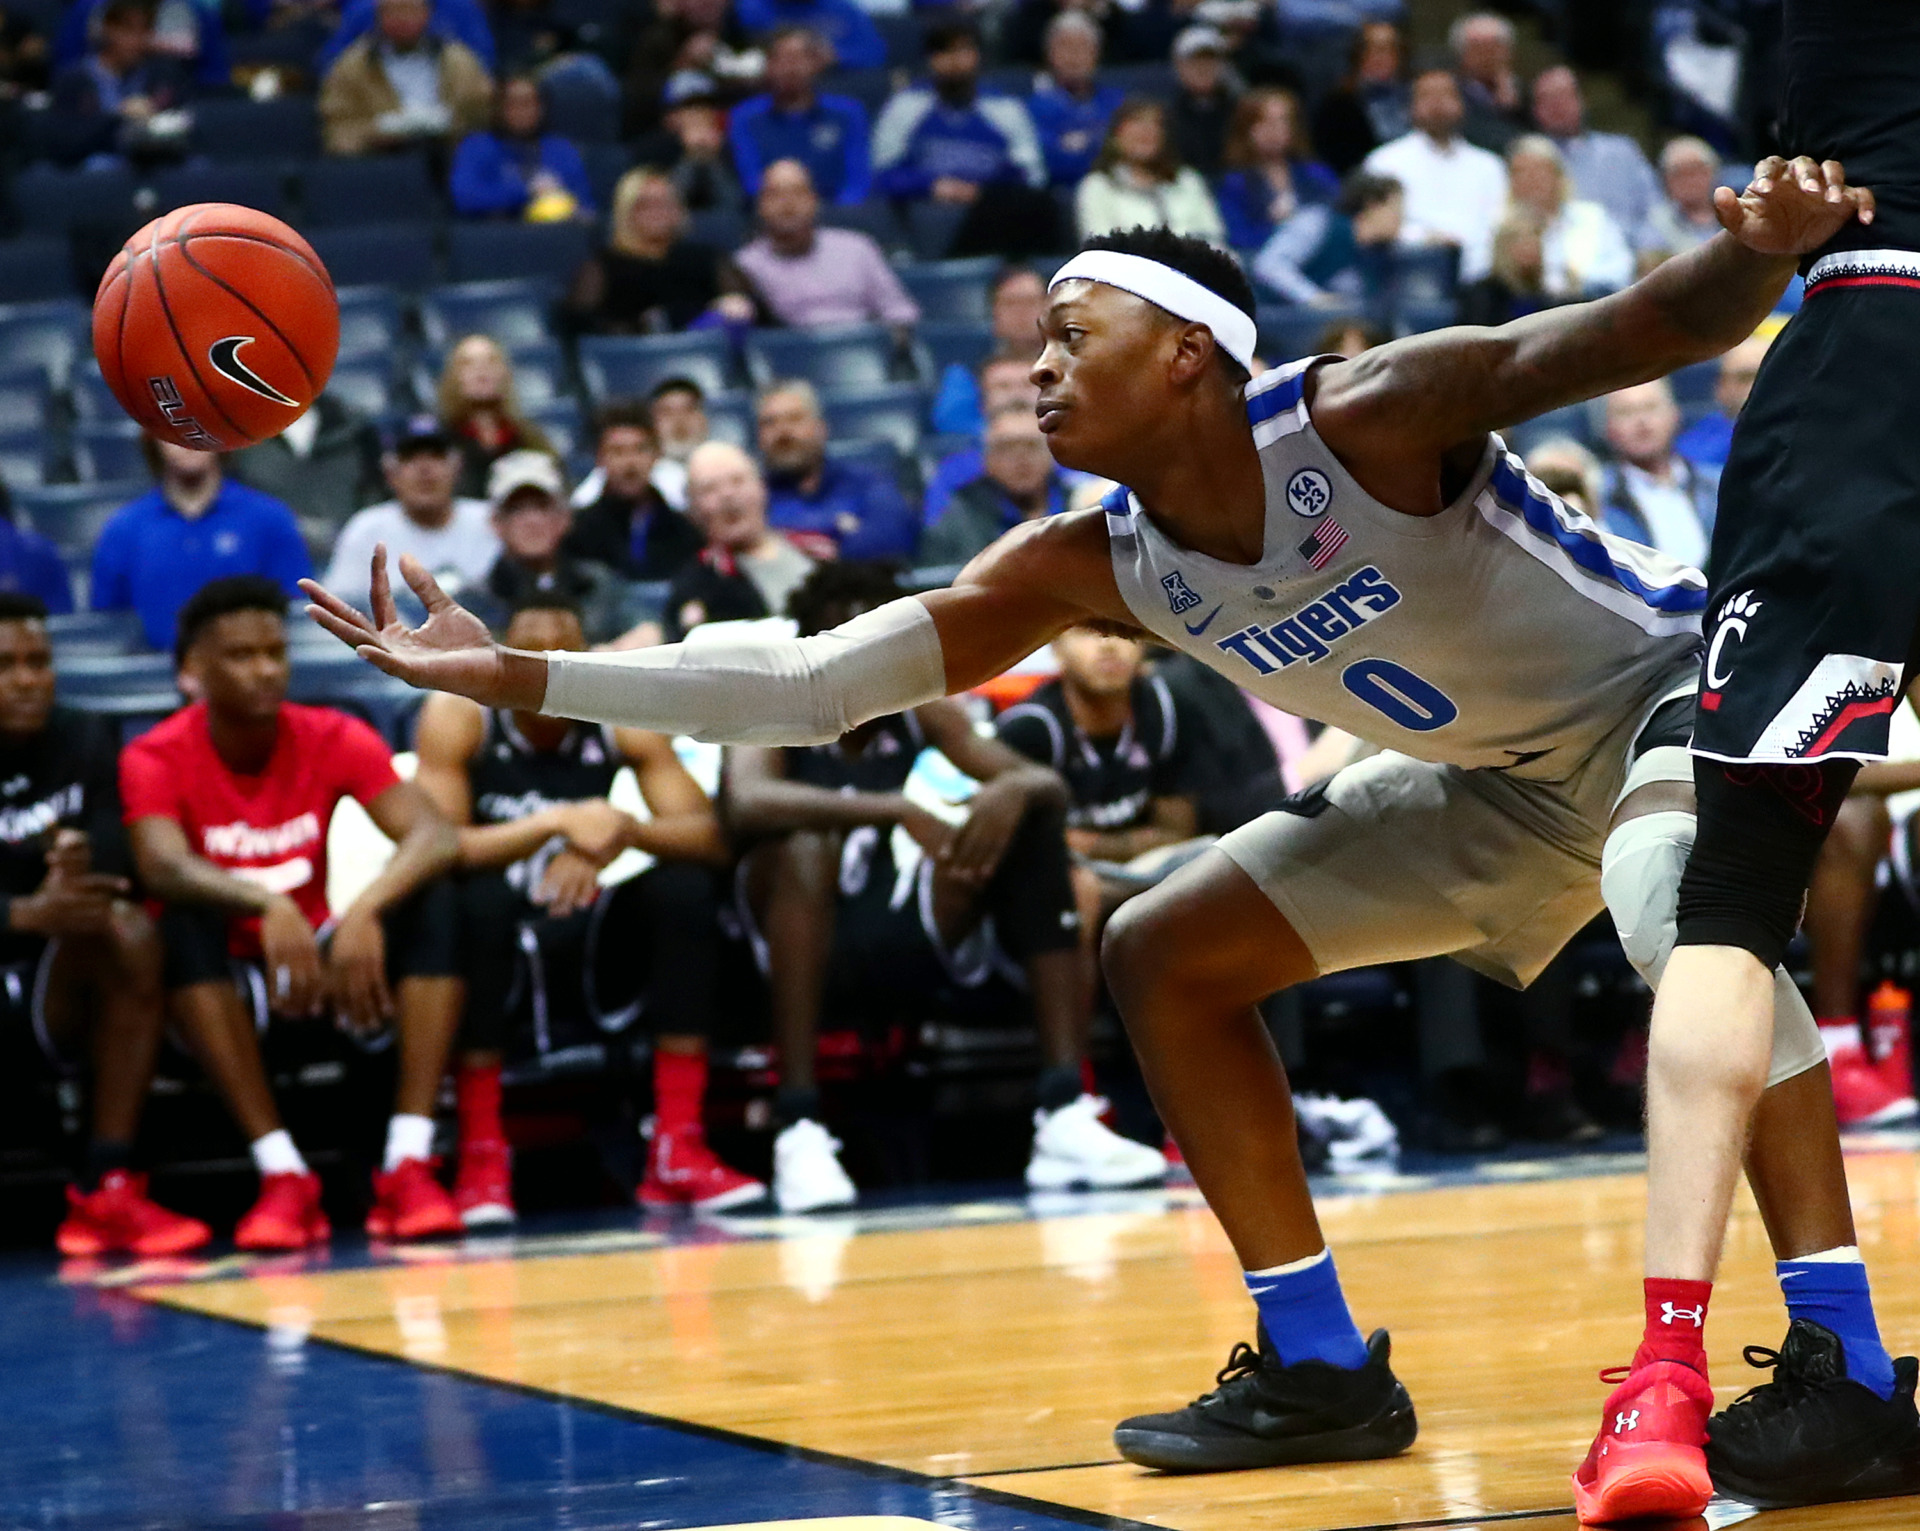 <strong>Memphis Tigers senior forward Kyvon Davenport (0) reaches for a ball going out of bounds during a game against the Cincinnati Bearcats on Thursday, Feb. 7, 2019. Davenport fouled out in the waning moments of the game.</strong>&nbsp;(Houston Cofield/Daily Memphian)